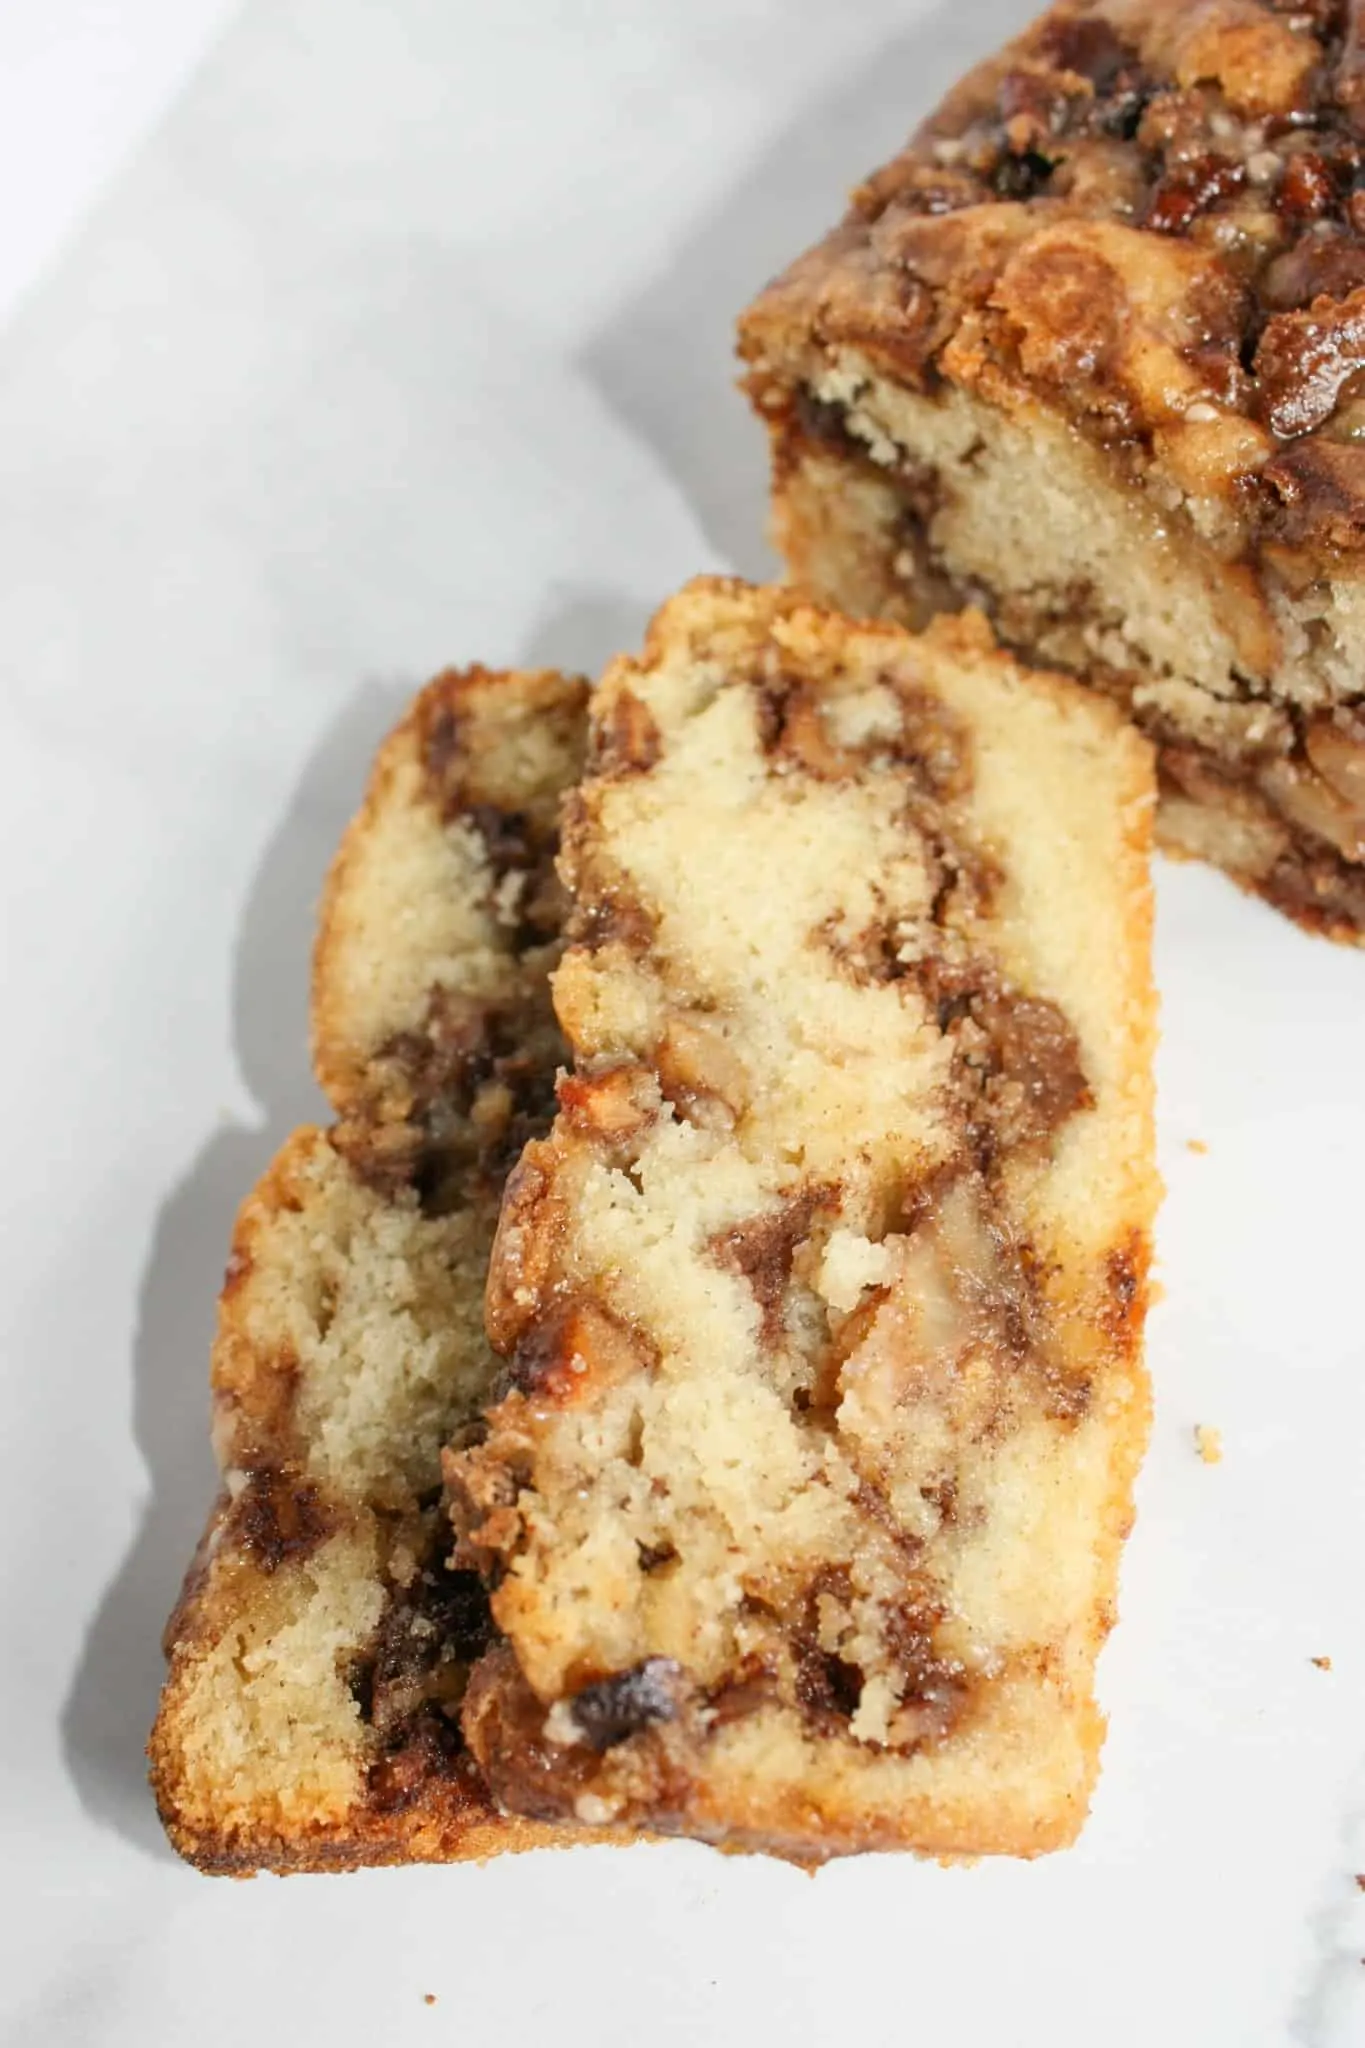 One thing I have missed since going gluten free is apple fritter donuts.  This recipe is not for donuts but this loaf really satisfied my apple fritter craving!